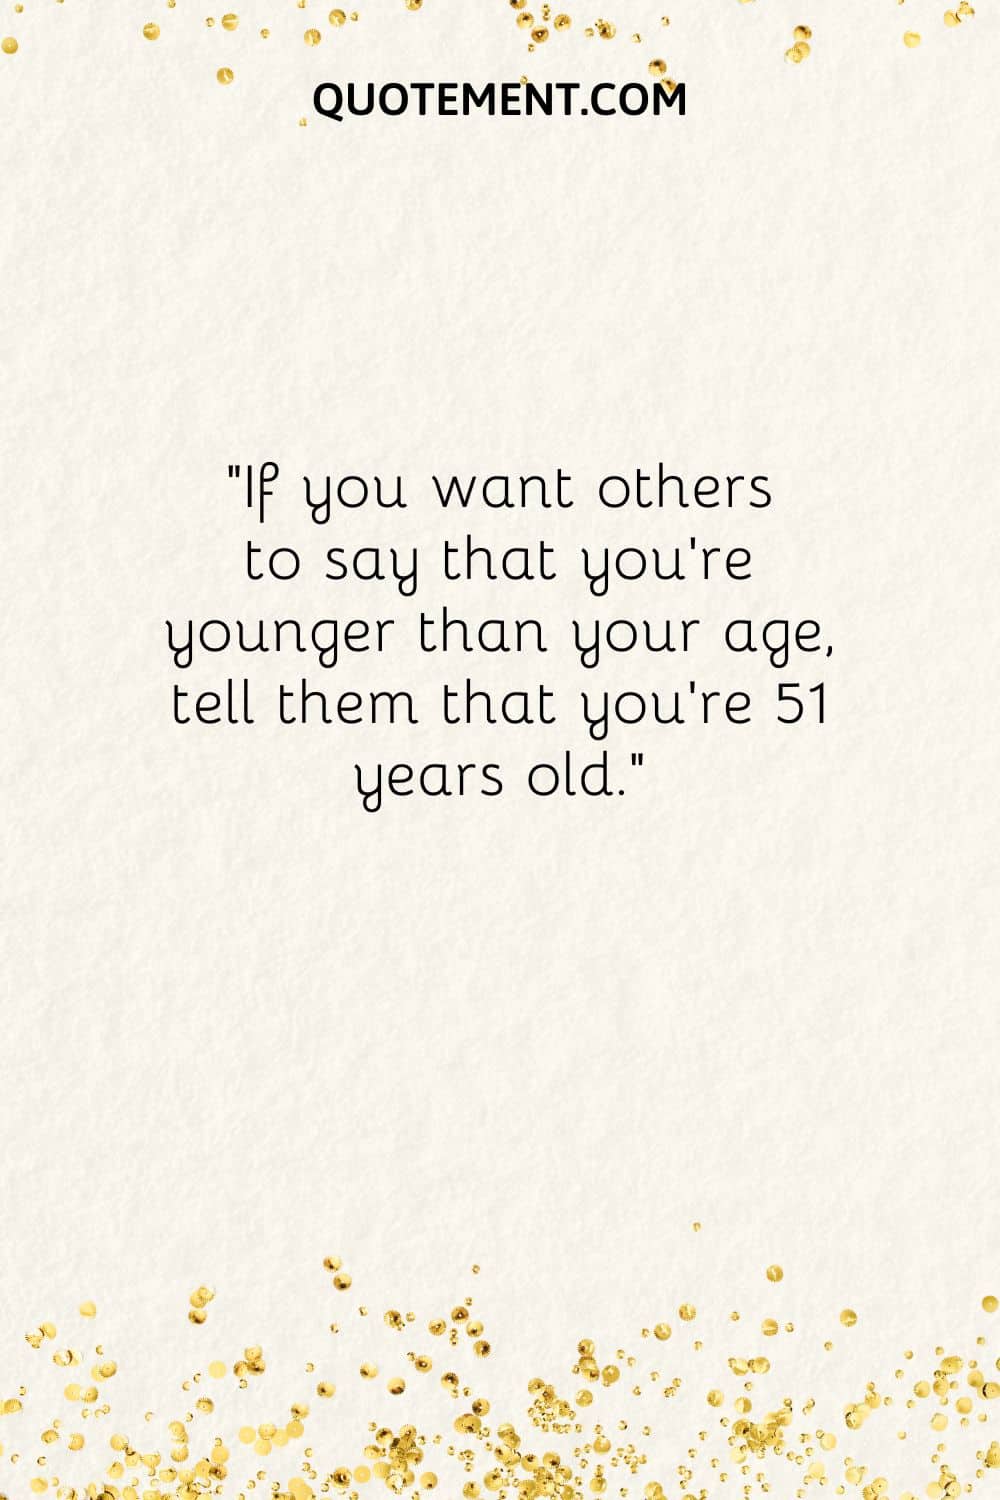 If you want others to say that you’re younger than your age, tell them that you’re 51 years old